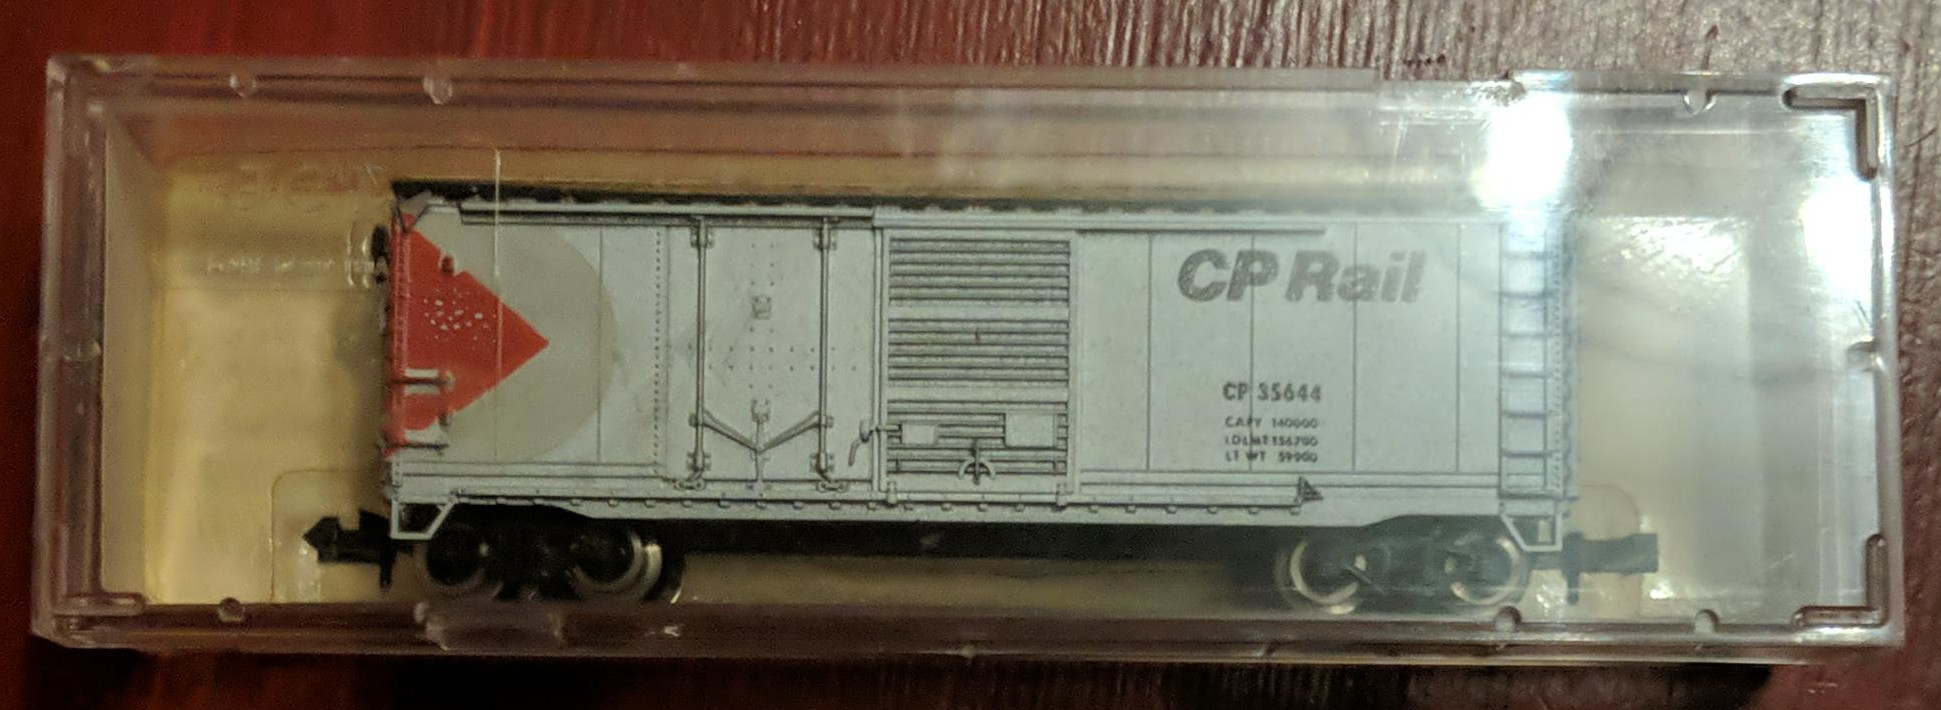 N Scale - JC Timmer - 3226 - Boxcar, 40 Foot, Steel Combo Door - Canadian Pacific - 35644